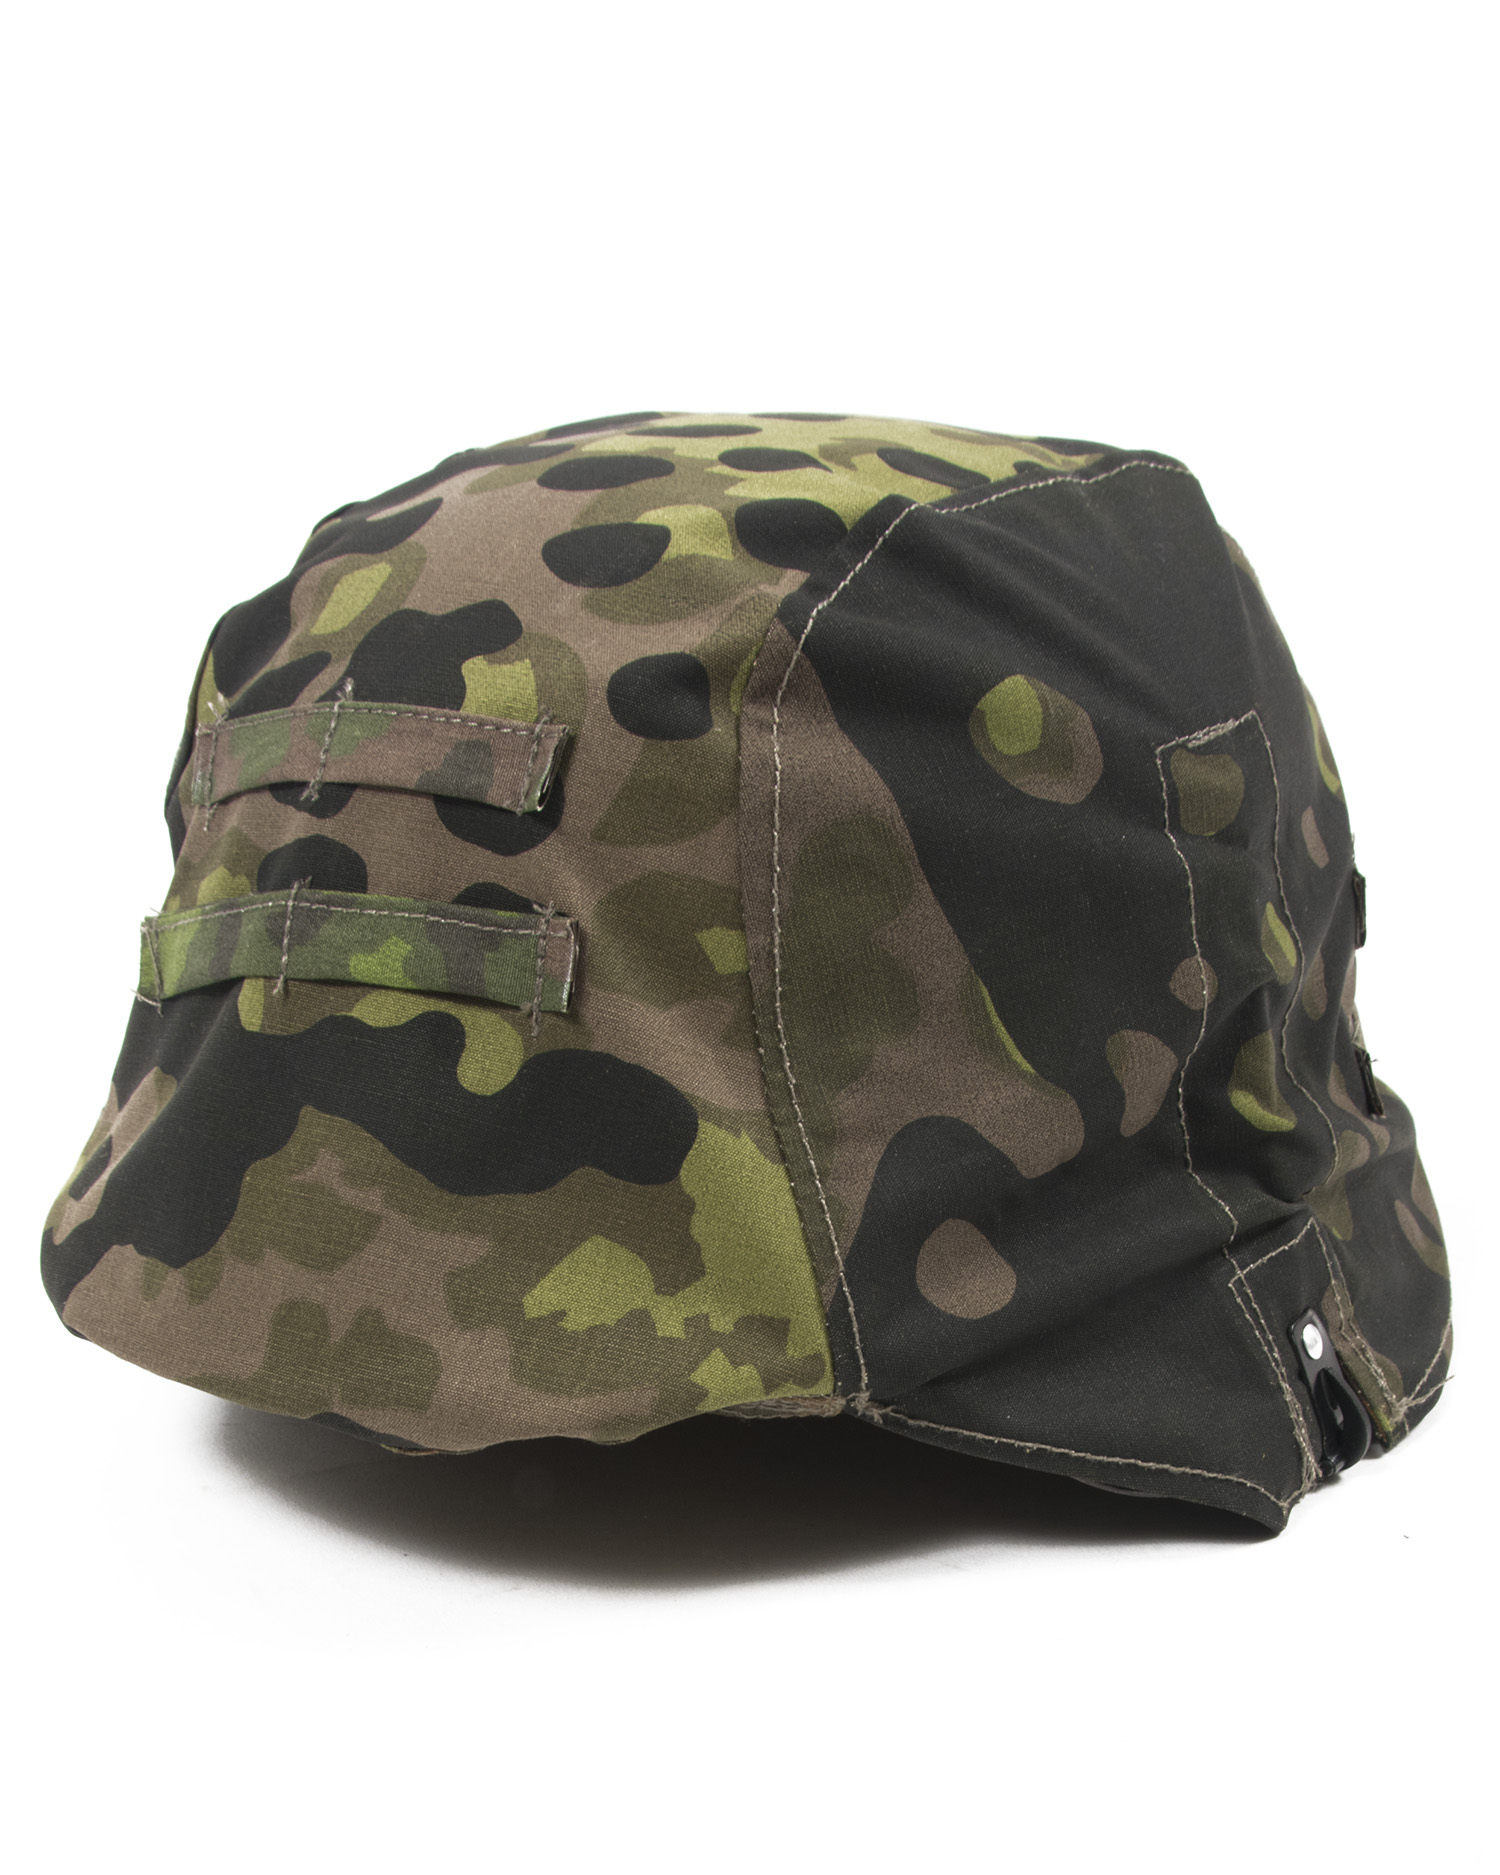 1/6th Veyron WWII Autumn Pea Camouflage Helmet Cover Model for 12" Figure Doll 